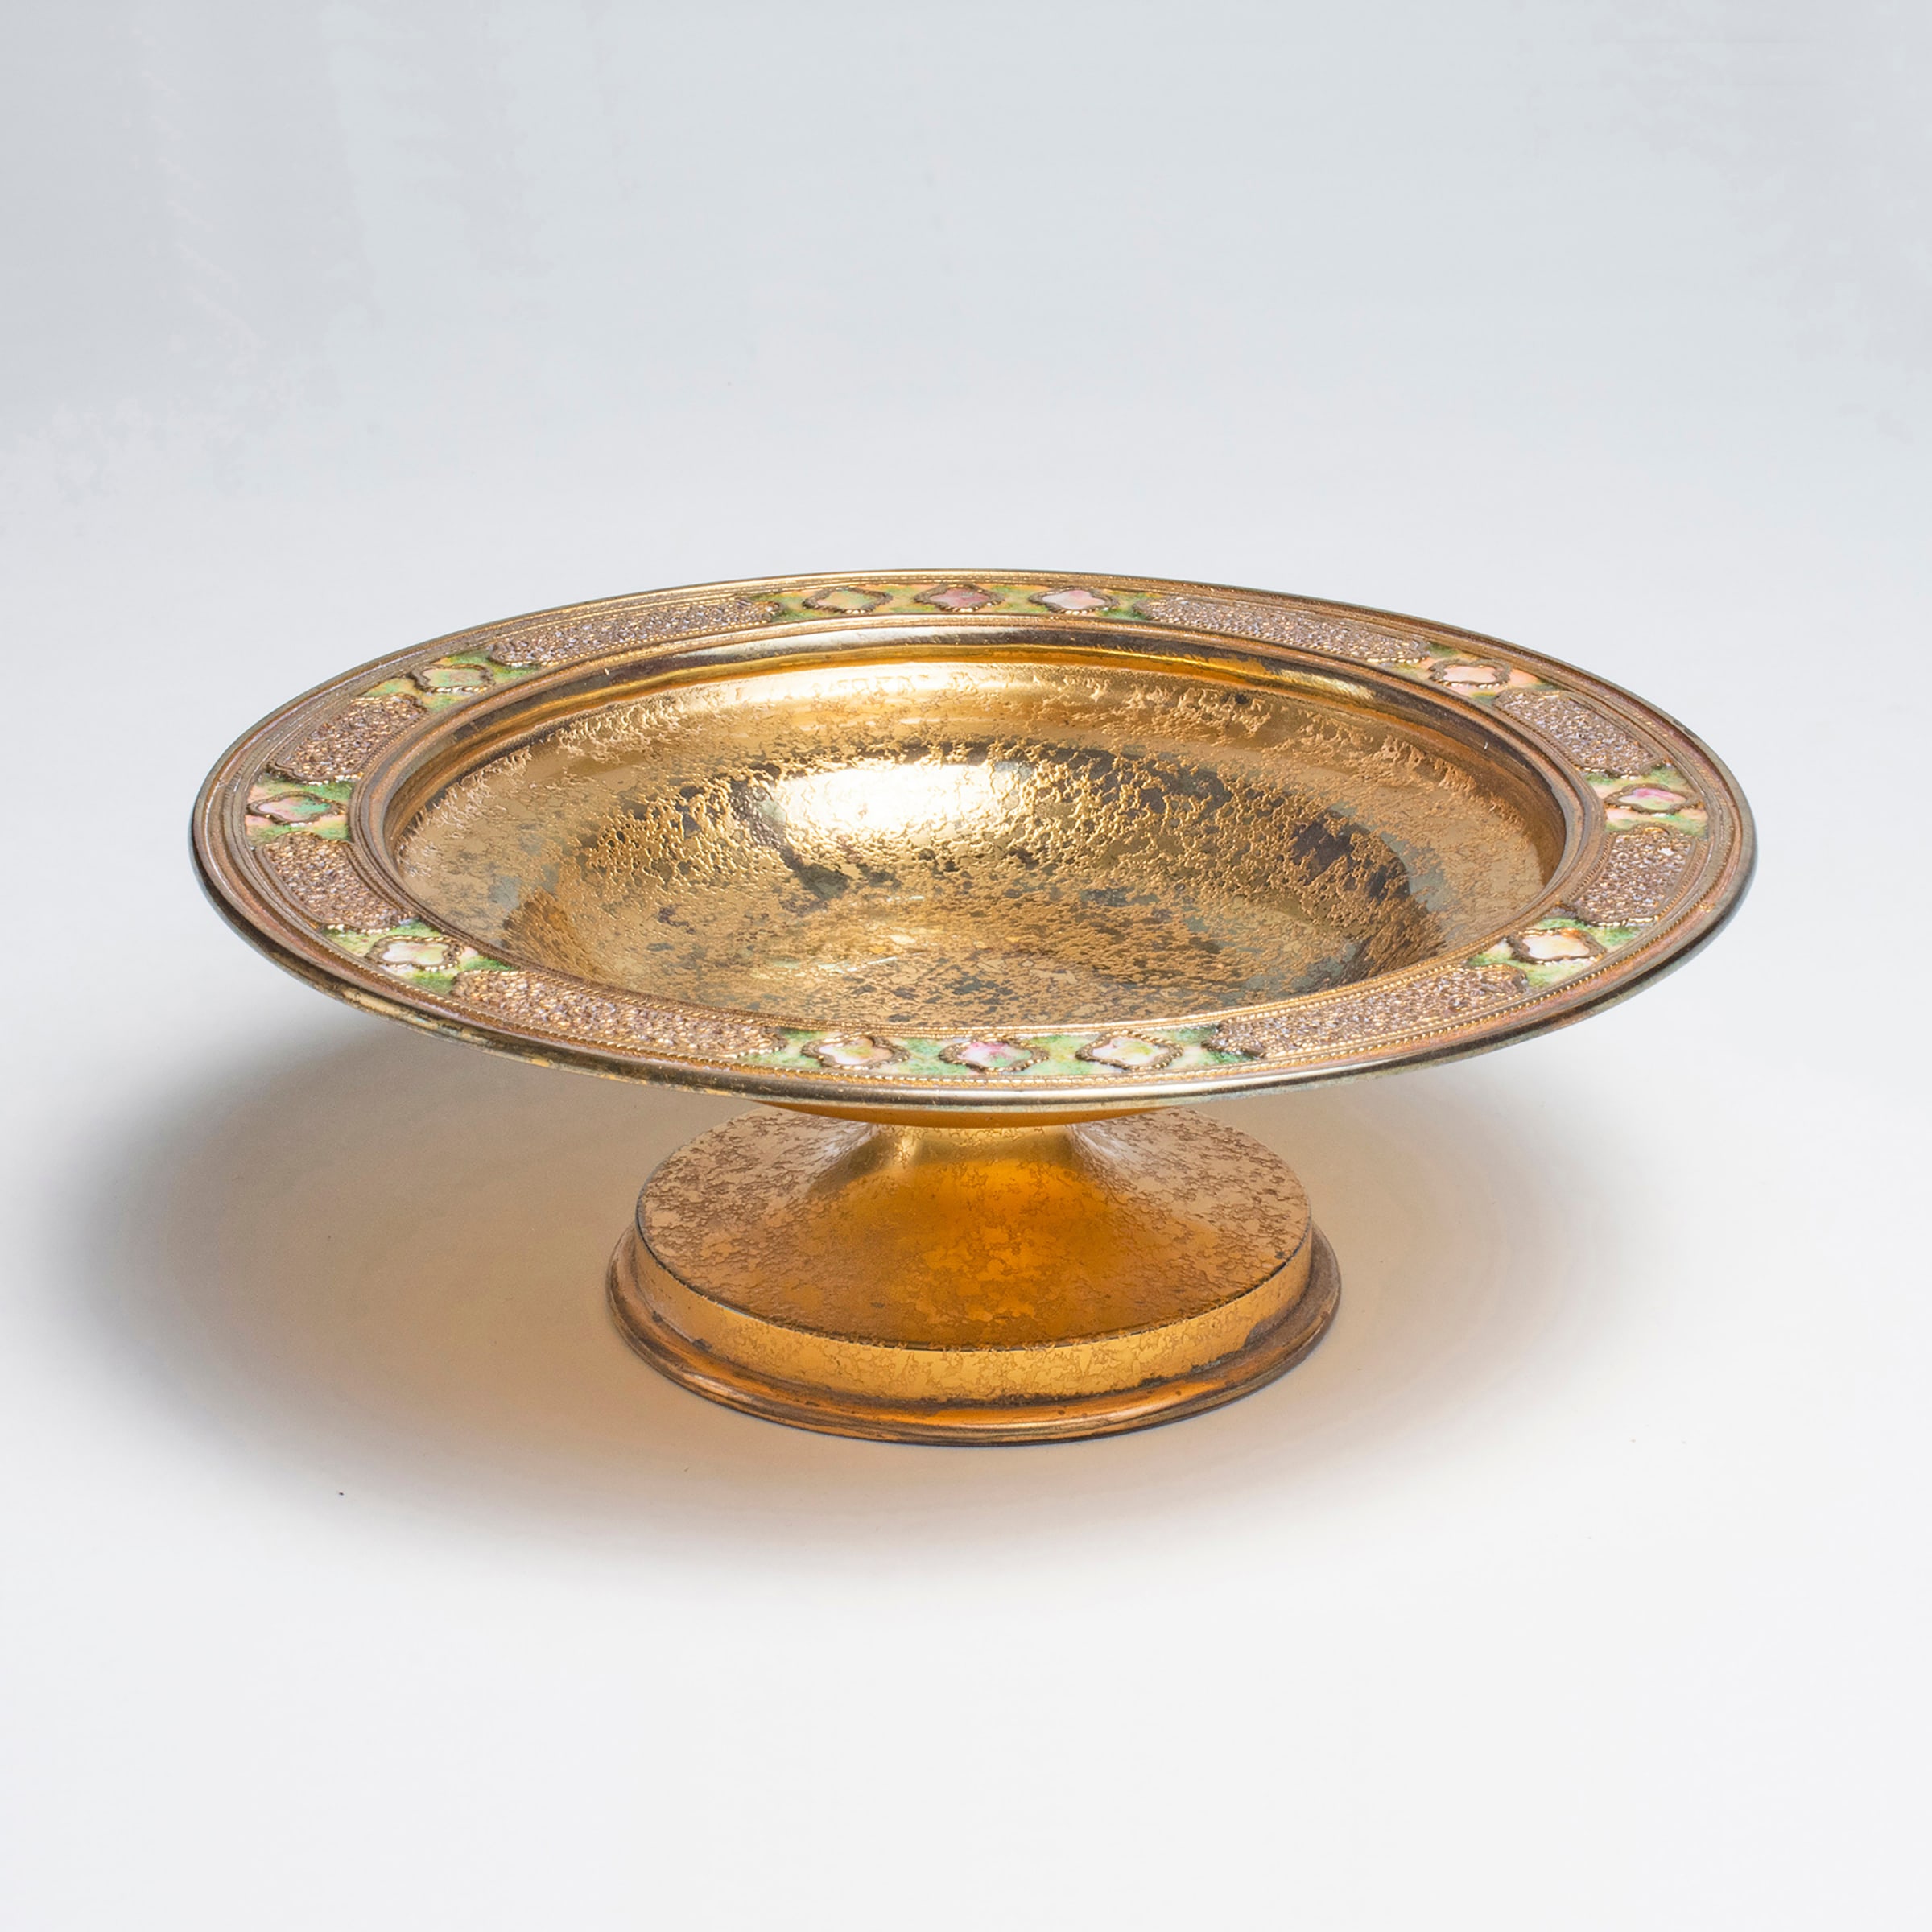 an acid etched bronze footed bowl by louis comfort tiffany with inset green enamel